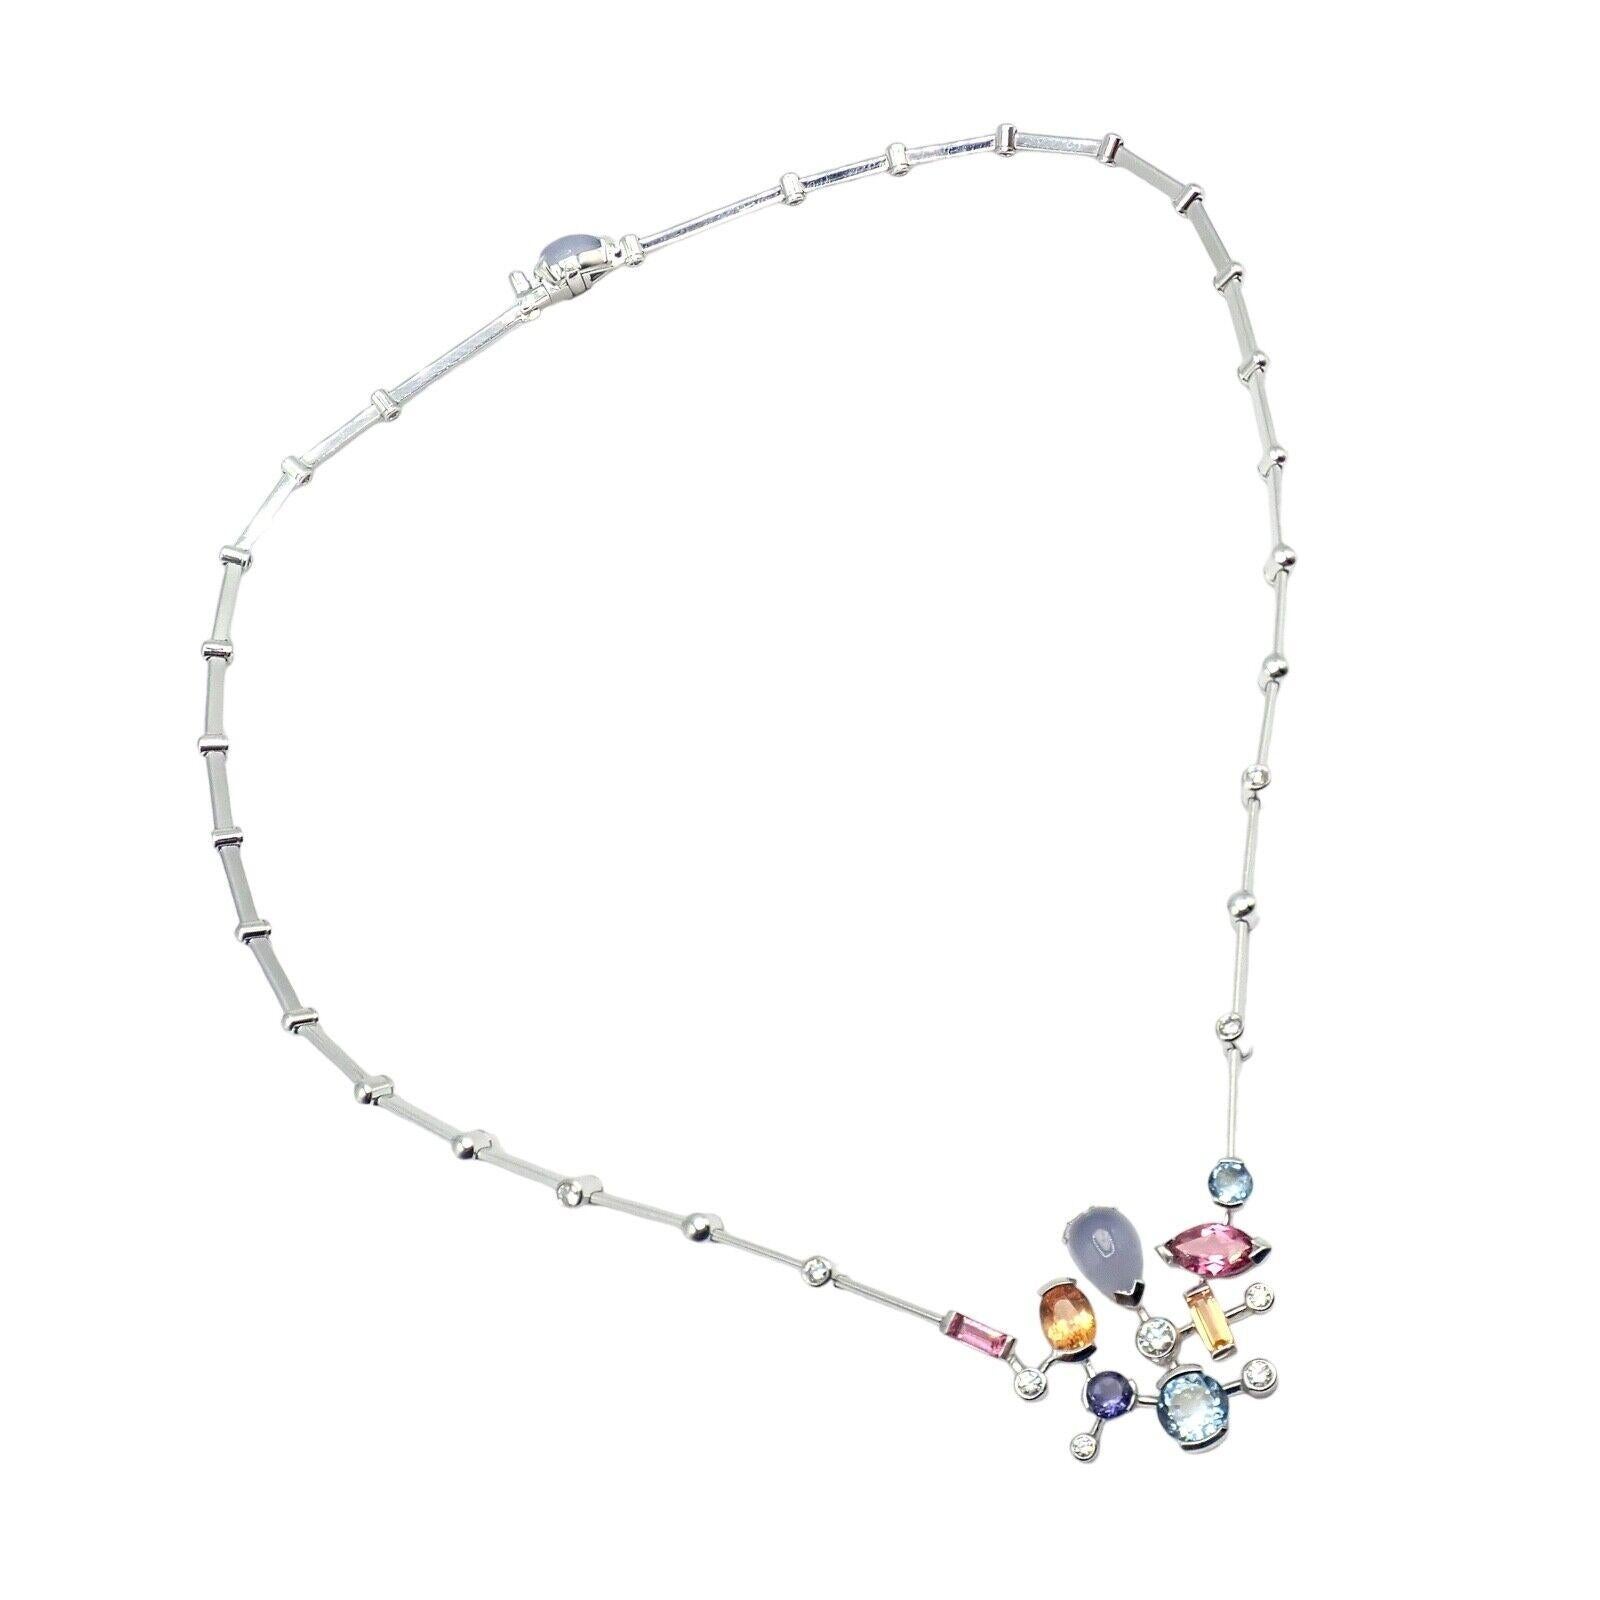 The Authentic Cartier Platinum Diamond Meli Melo Gemstone Necklace is a true statement of luxury and sophistication. Crafted in platinum, the necklace showcases a stunning combination of diamonds and colorful gemstones arranged in a meli melo